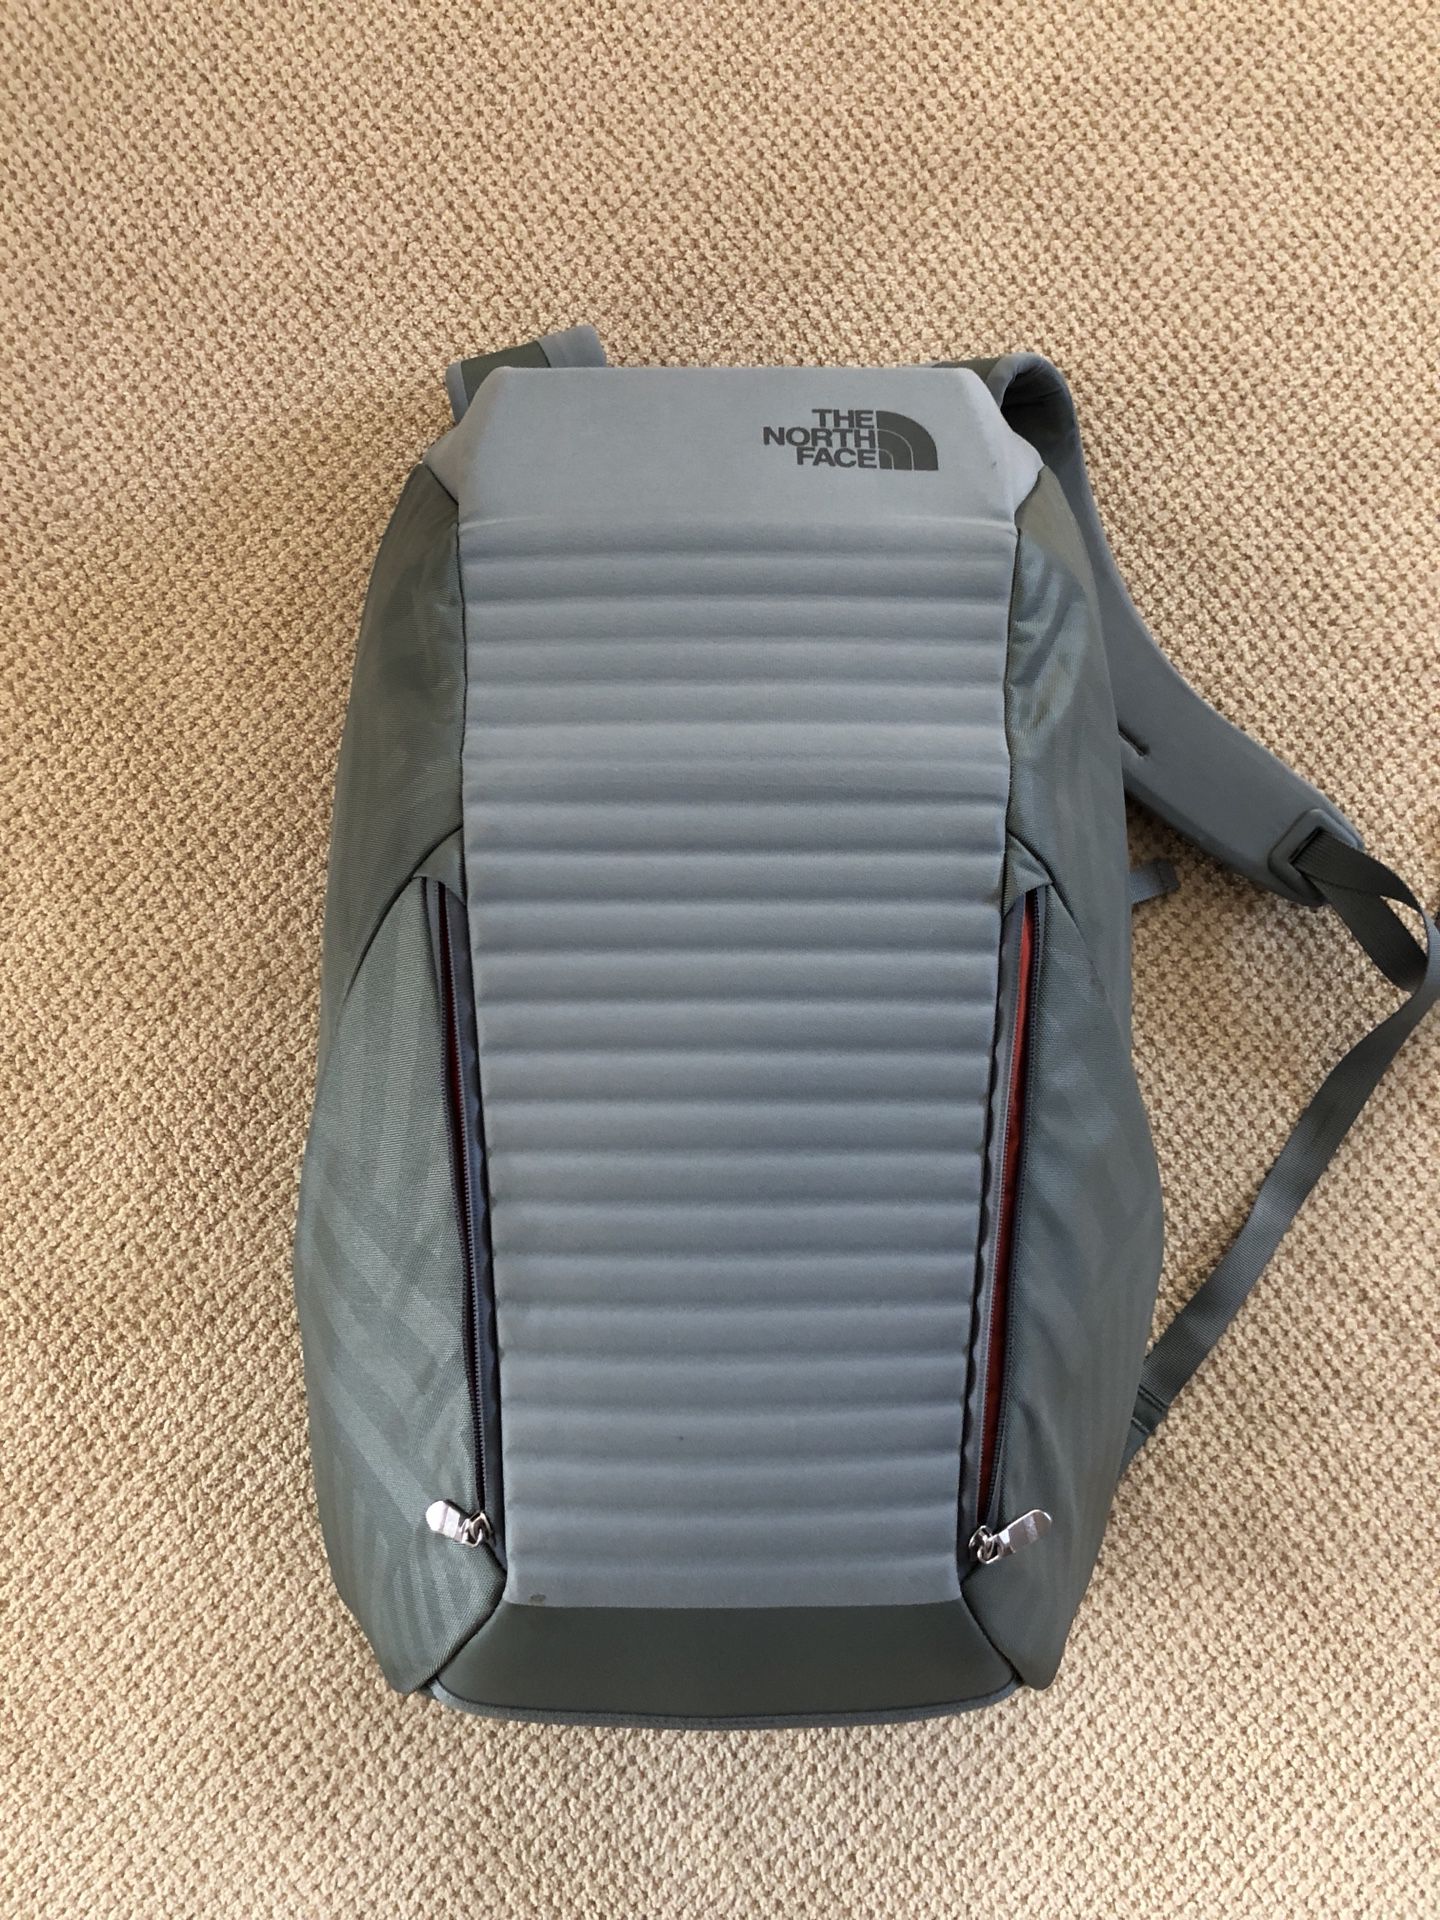 North Face Access Pack 28l Laptop 15 Backpack For Sale In Harrison Charter Township Mi Offerup